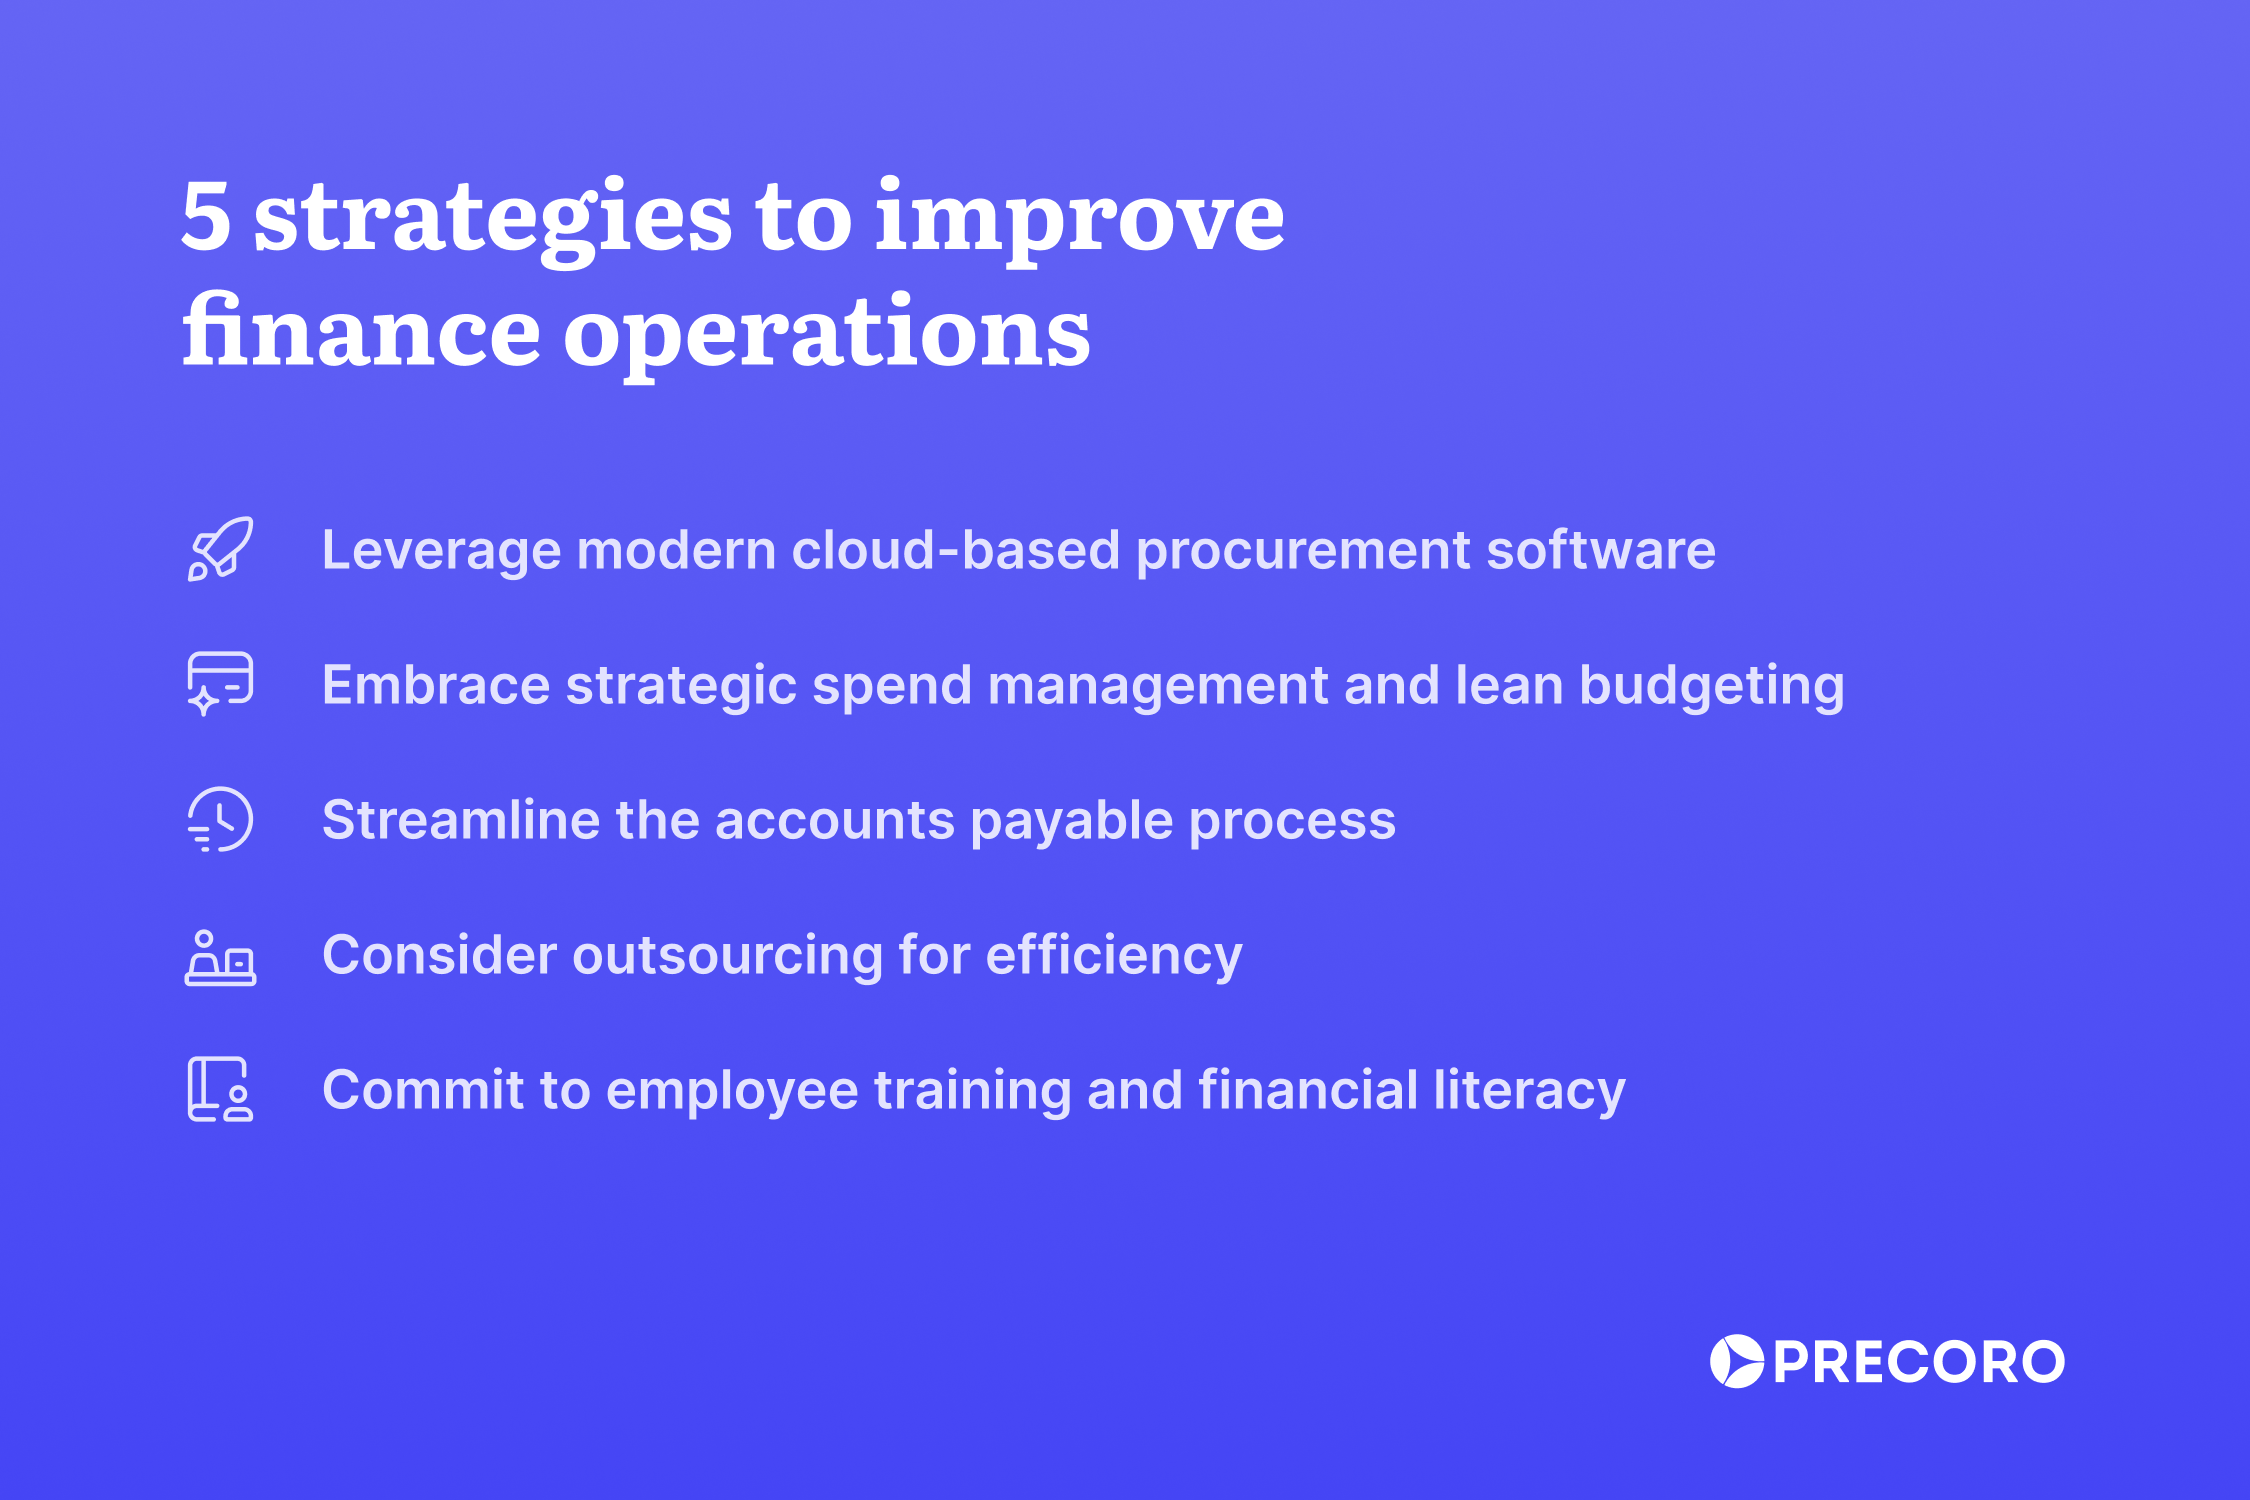 5 strategies to improve finance operations